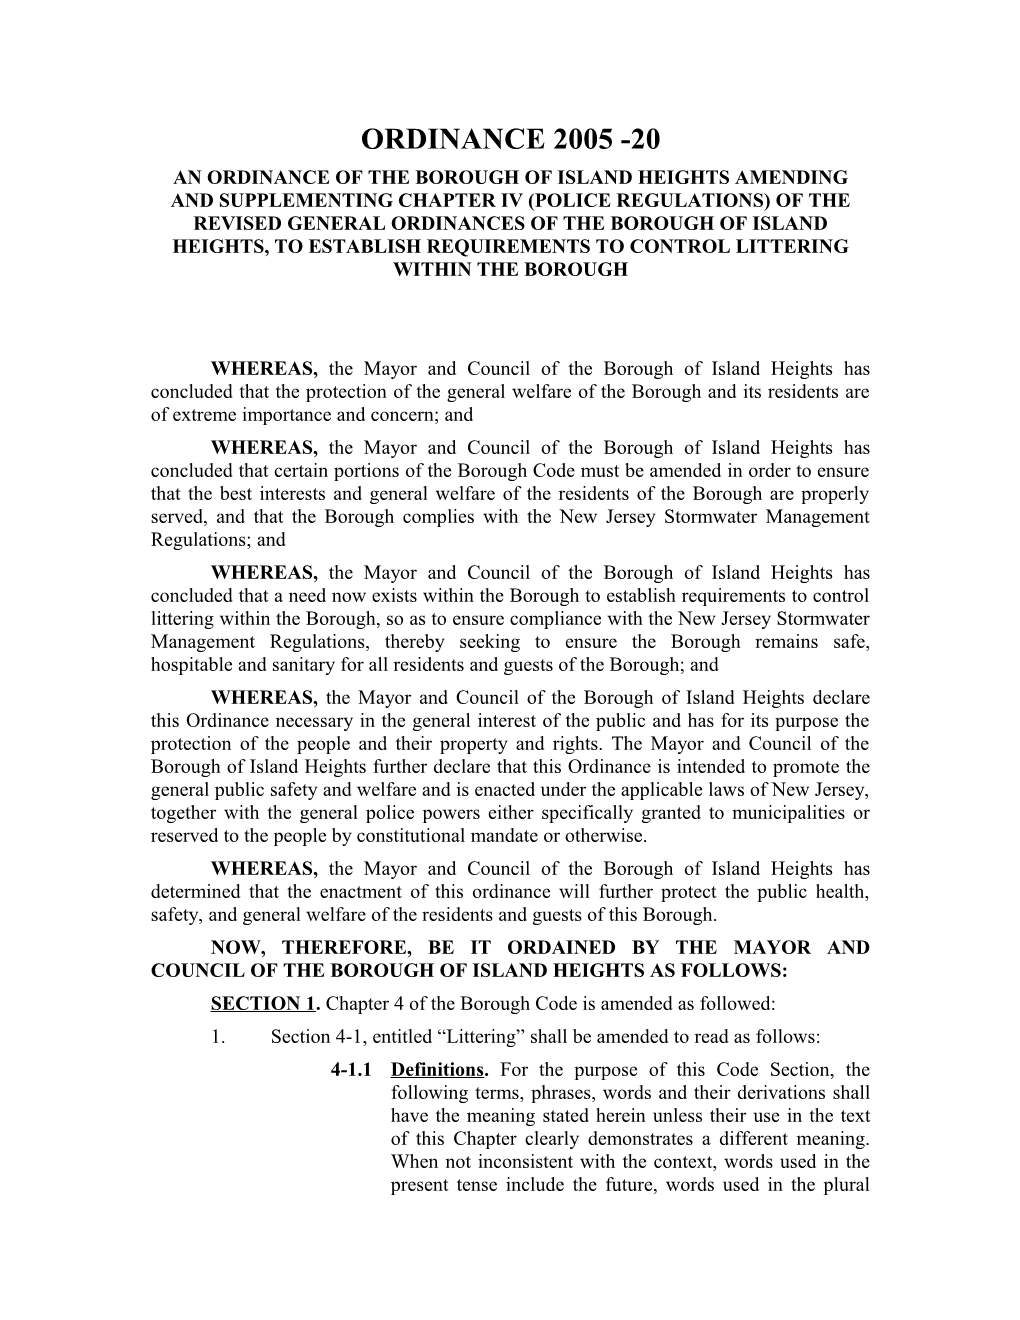 An Ordinance of the Borough of Island Heights Amending Andsupplementing Chapter Iv (Police